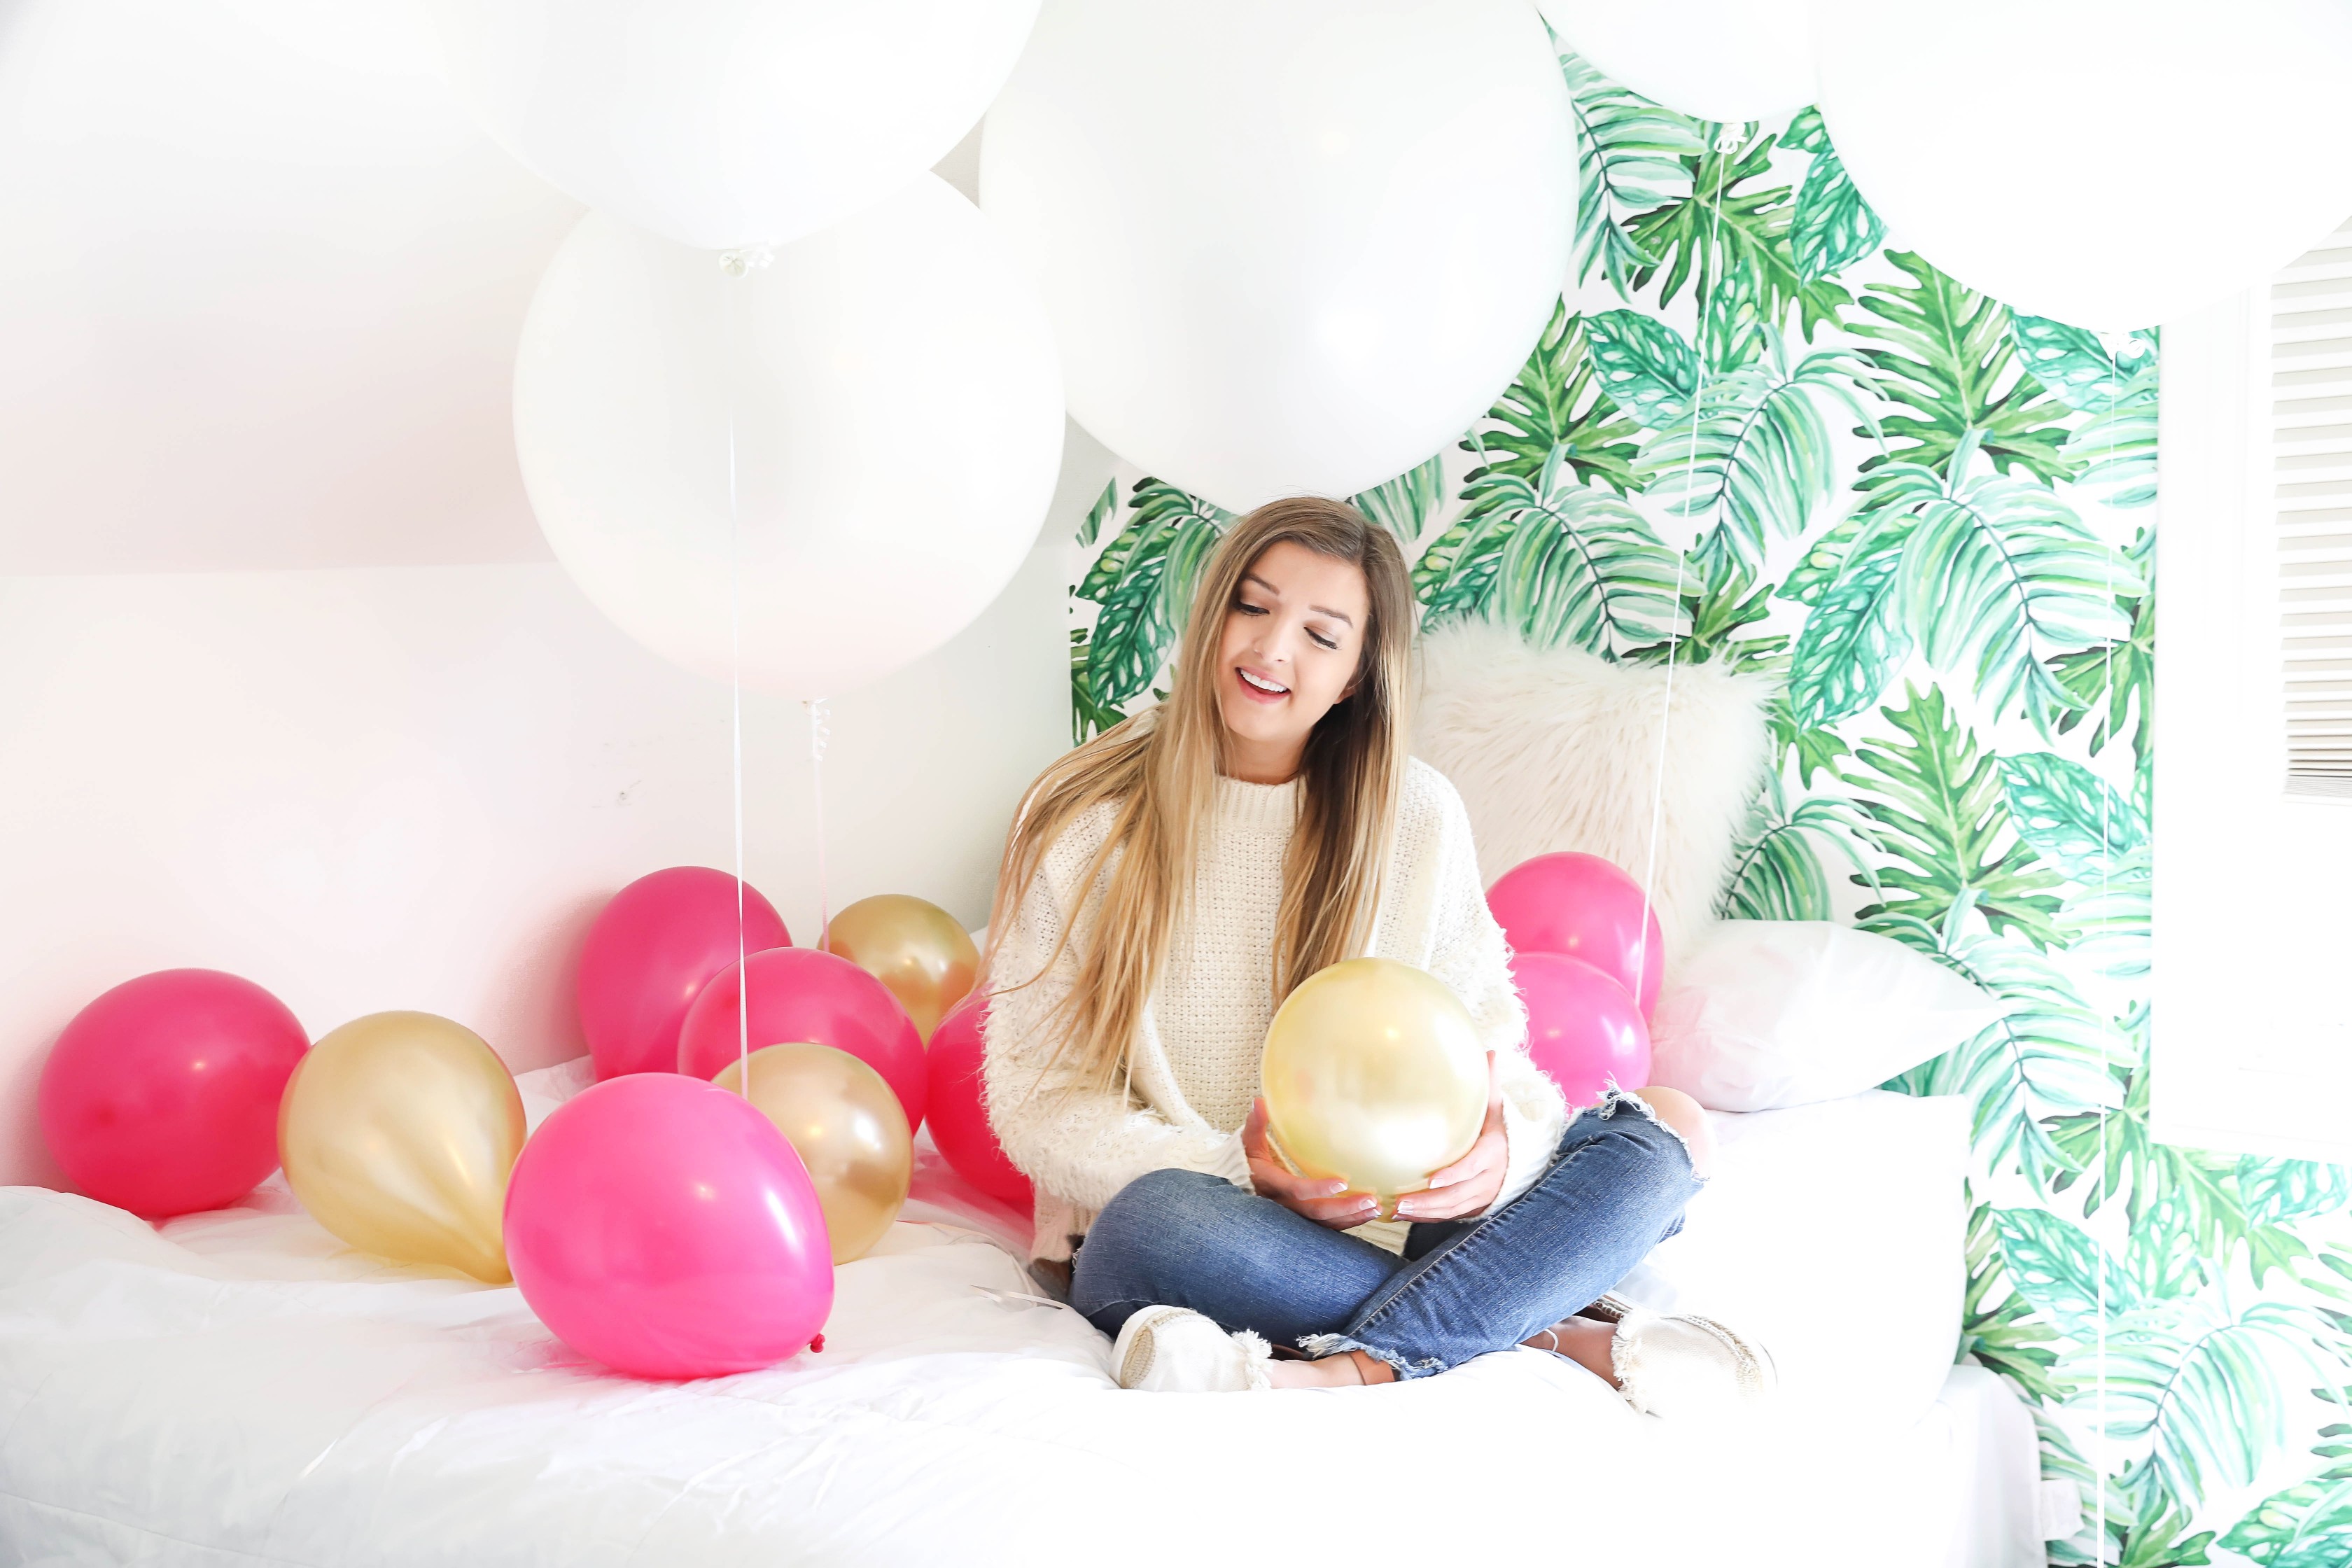 Birthday photoshoot with balloons on the bed fashion blog daily dose of charm by lauren lindmark